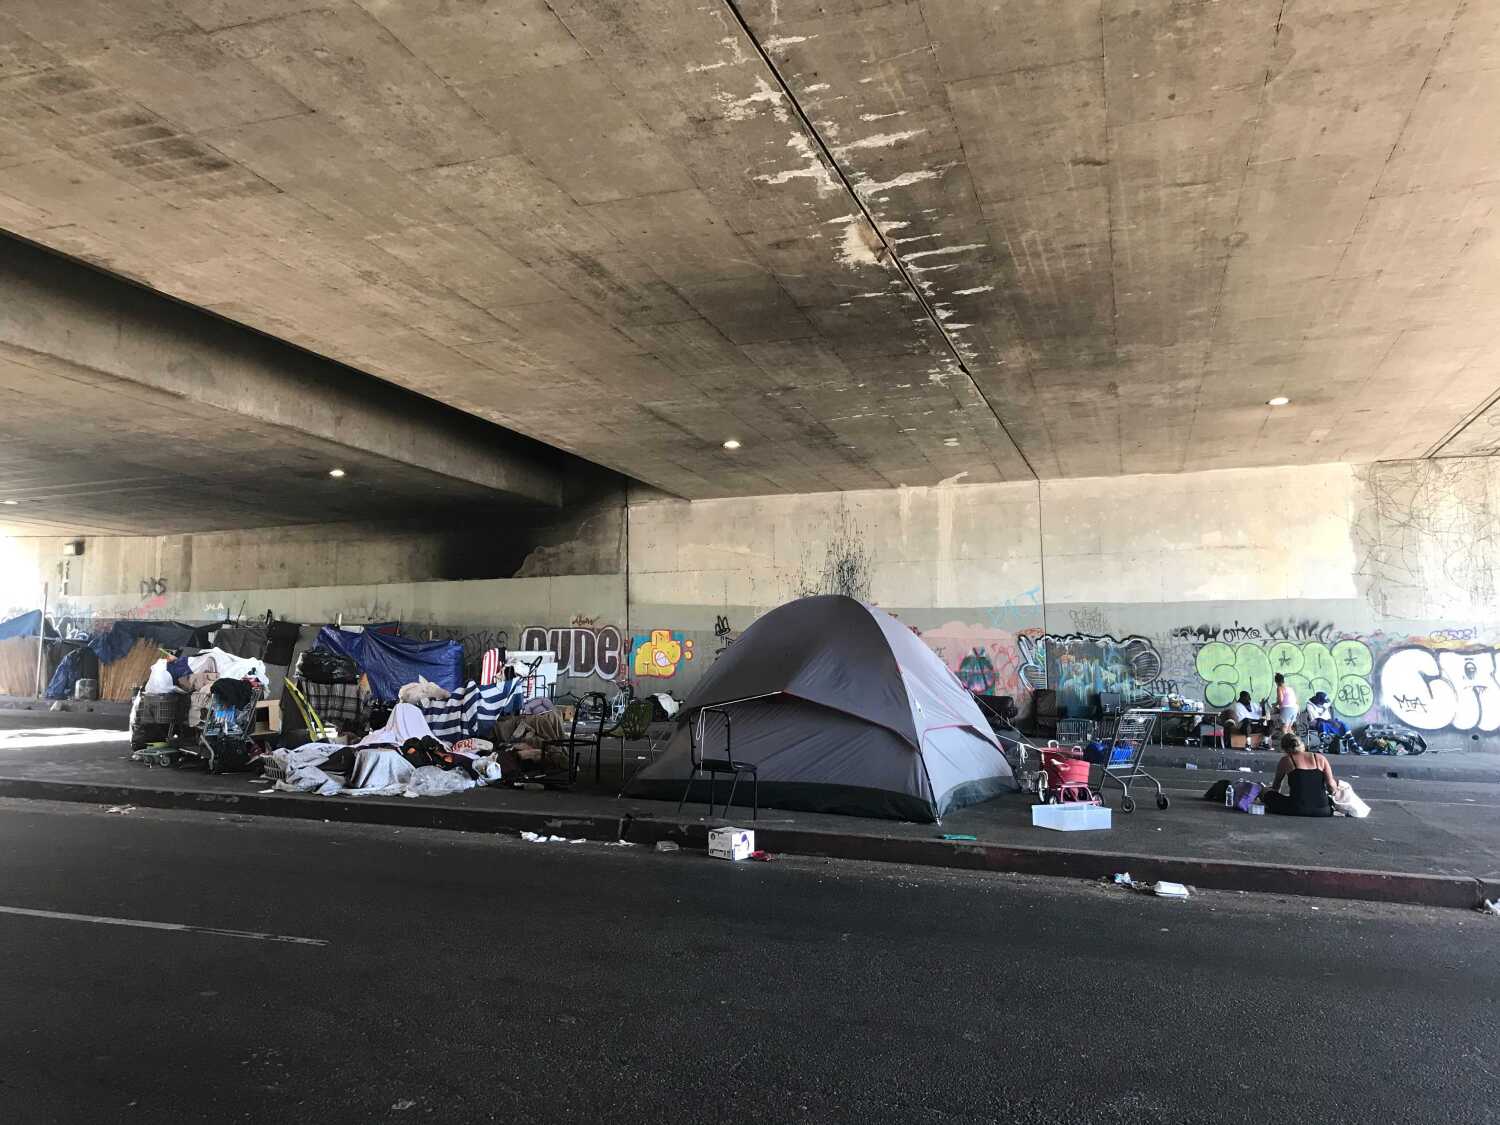 Woman sues L.A. after being struck by a car on a street where tents block the sidewalk